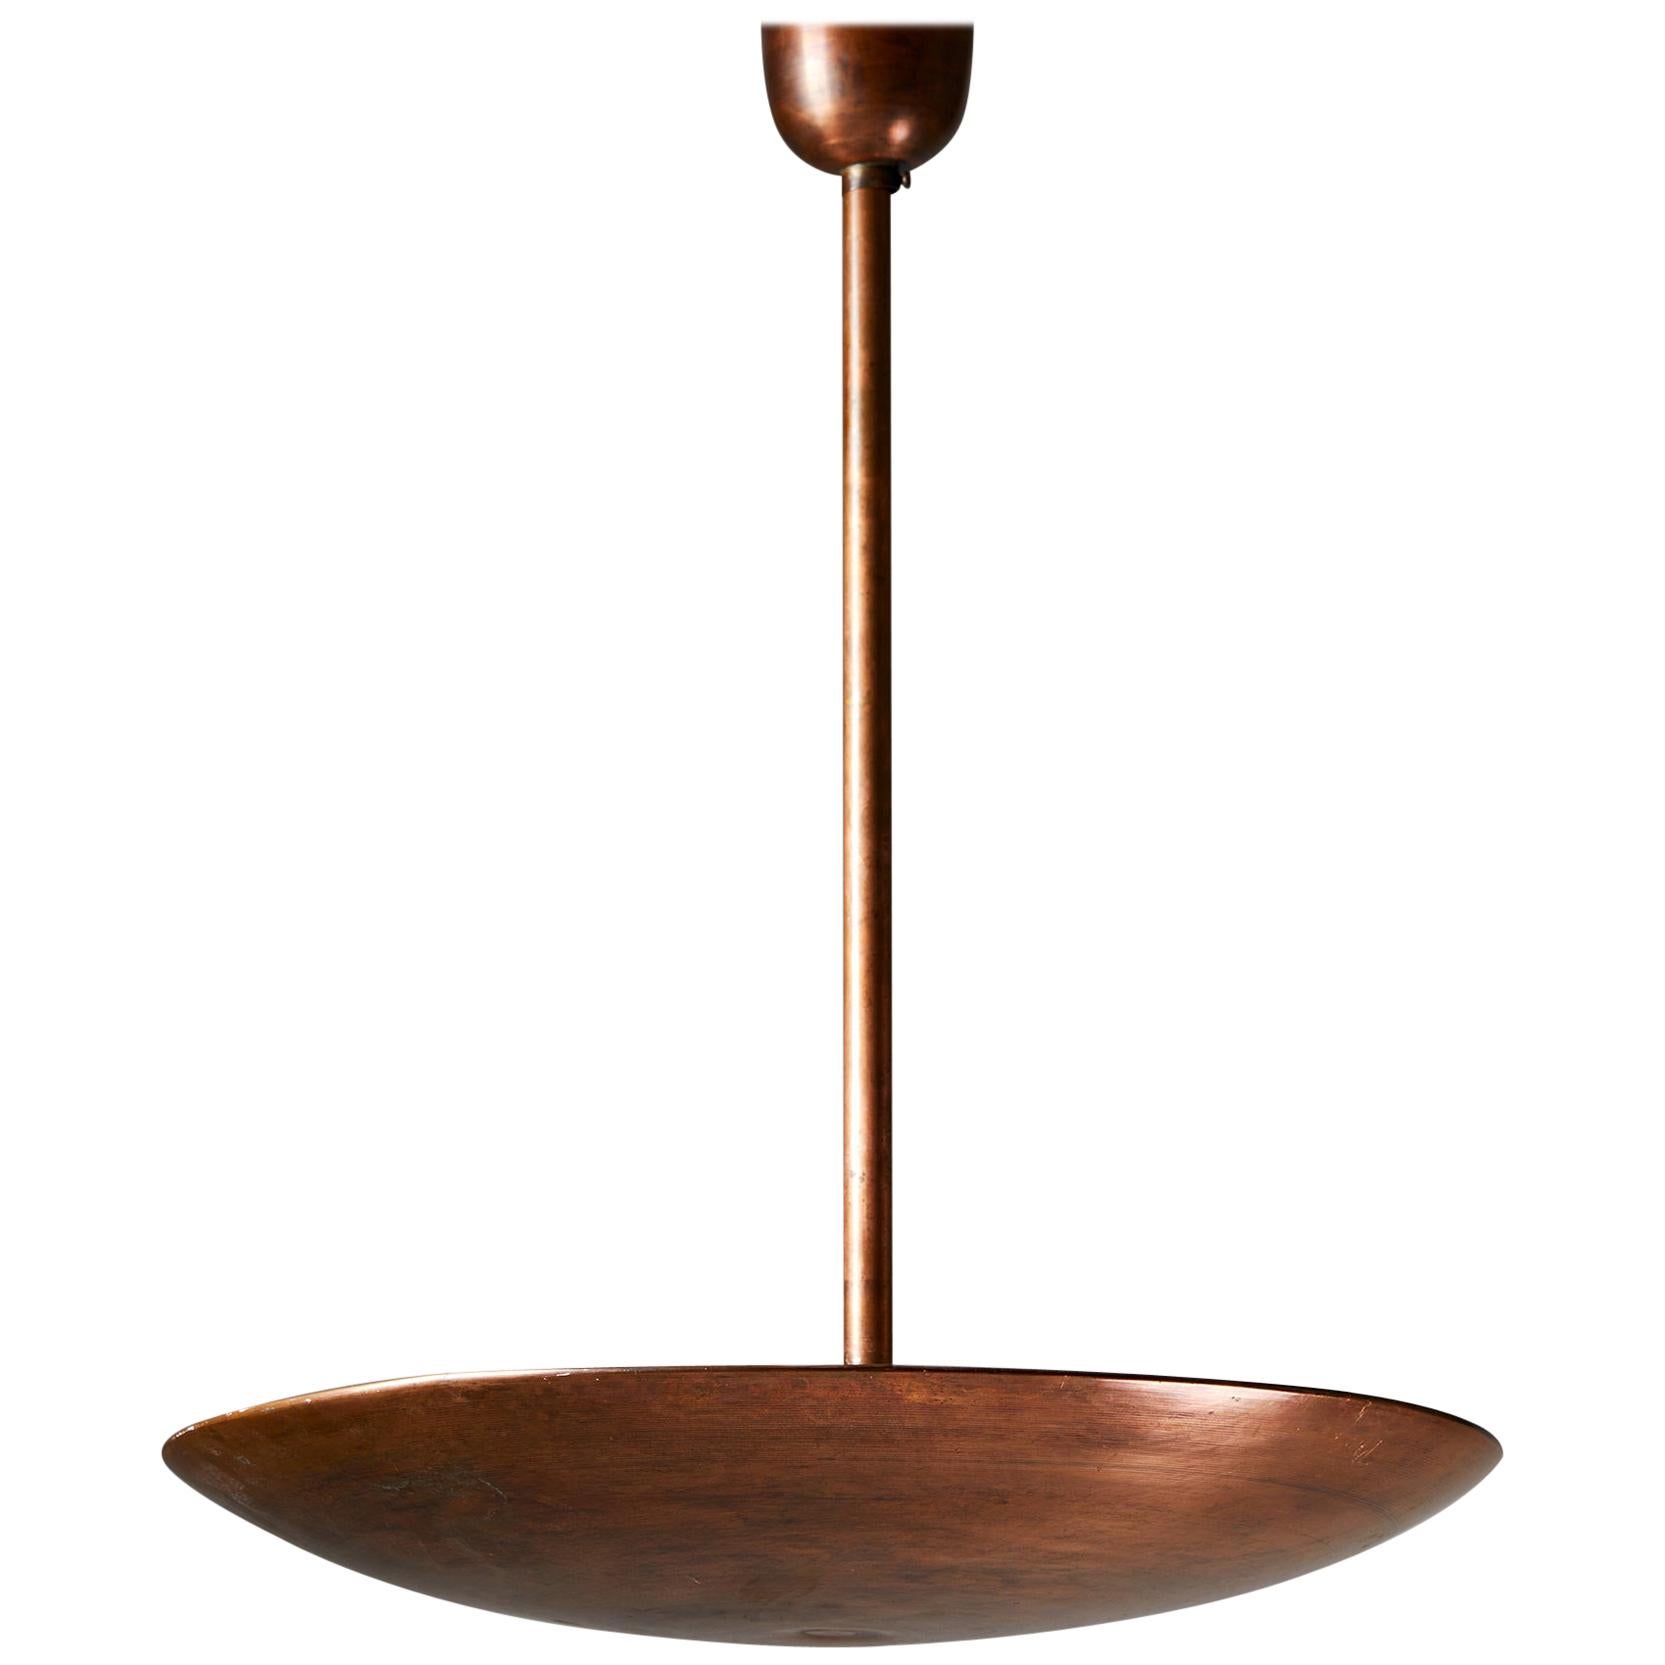 Copper Ceiling Lamp, Anonymous, Sweden, 1960's